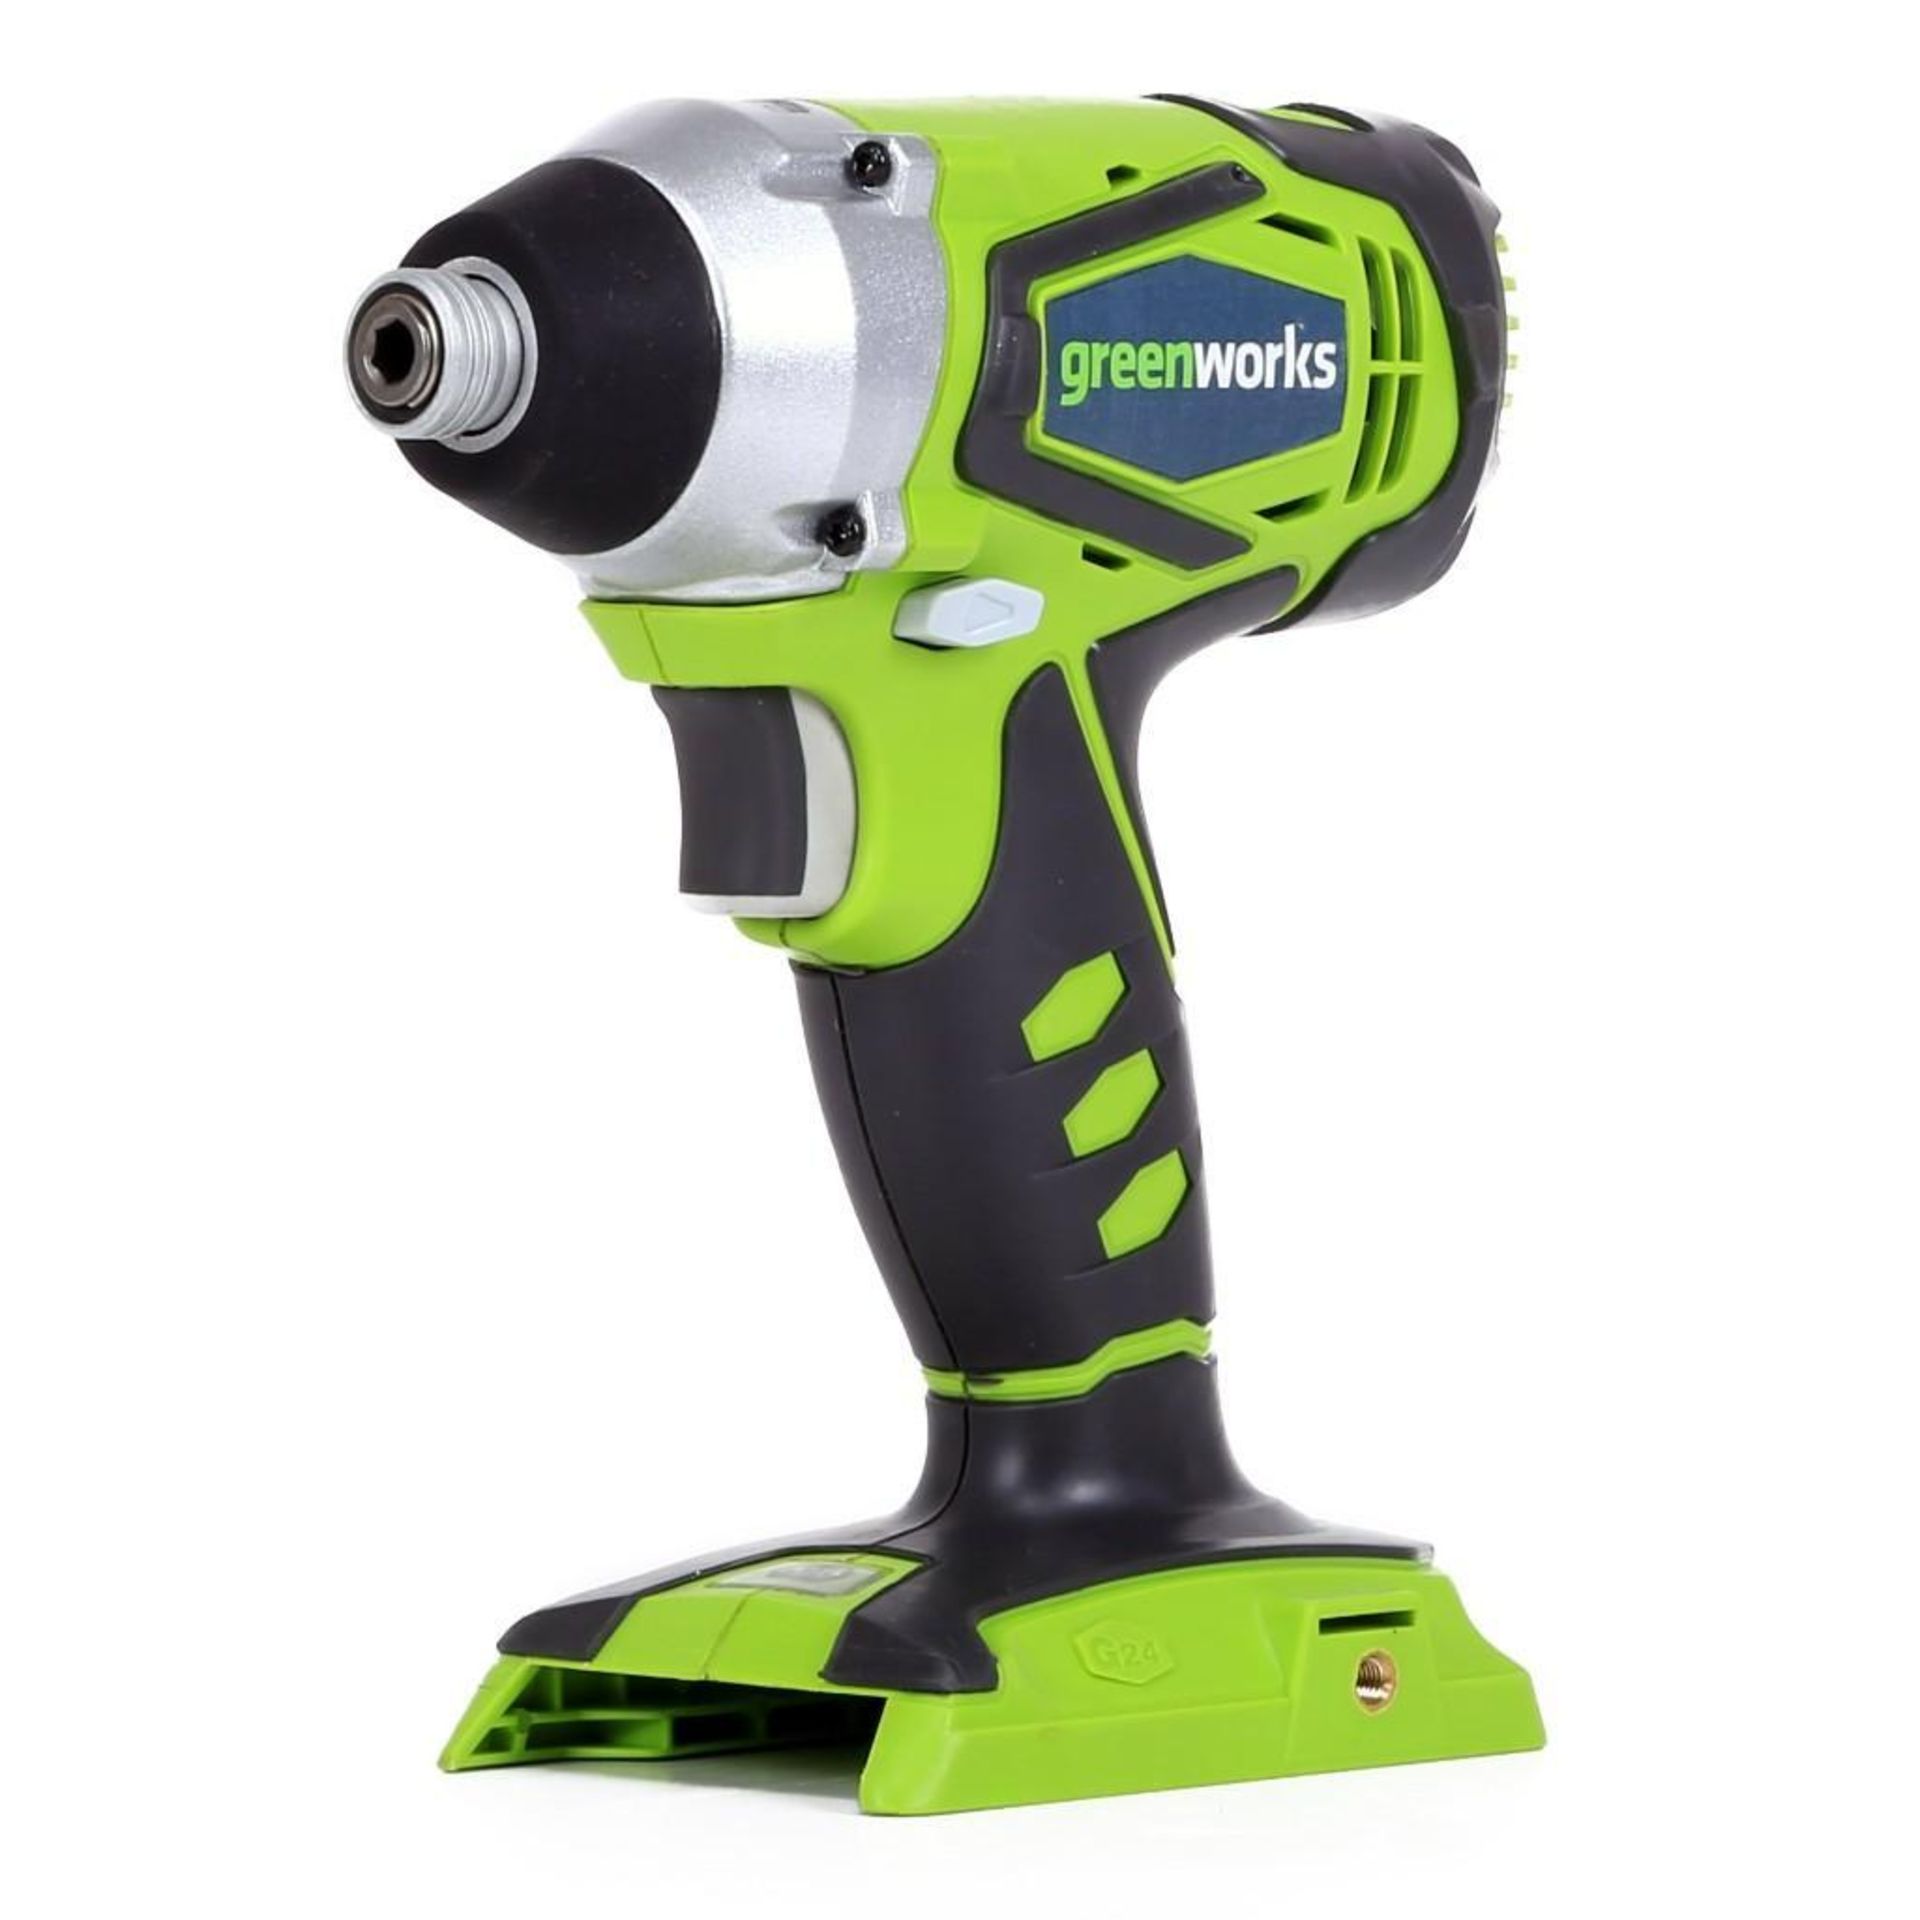 Boxed Green works 24V Cordless Impact Driver G24ID RRP £49.99 RRP